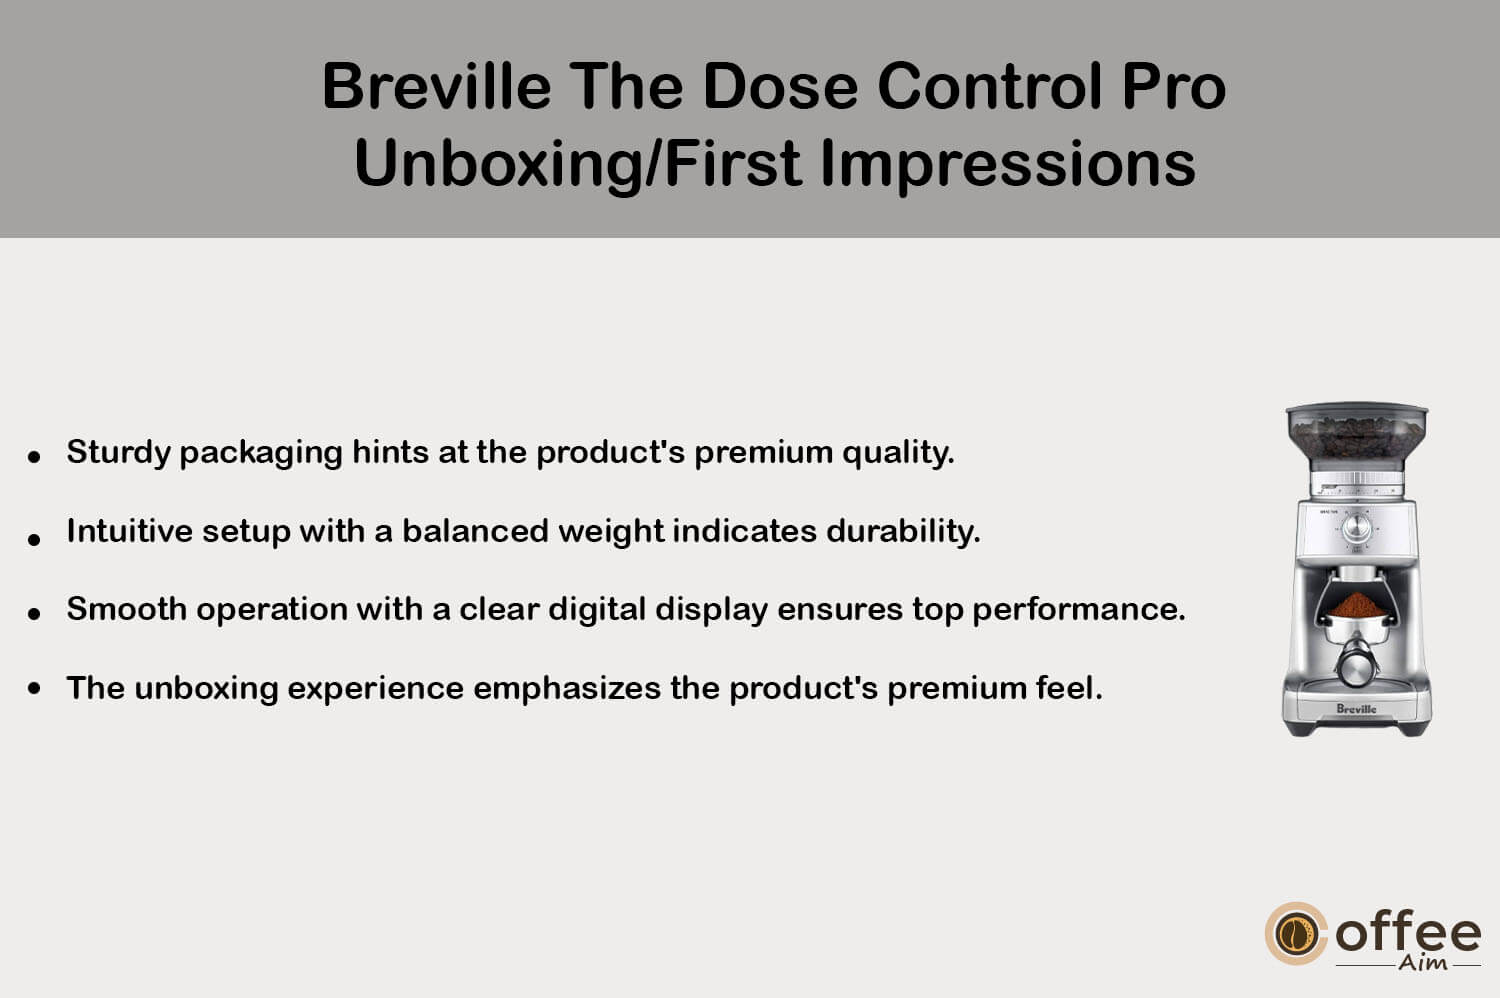 This visual encapsulates the initial unboxing experience and the immediate impressions that arise upon laying eyes on the Breville The Dose Control Pro, within the context of our comprehensive review titled ''Breville The Dose Control Pro Review.''